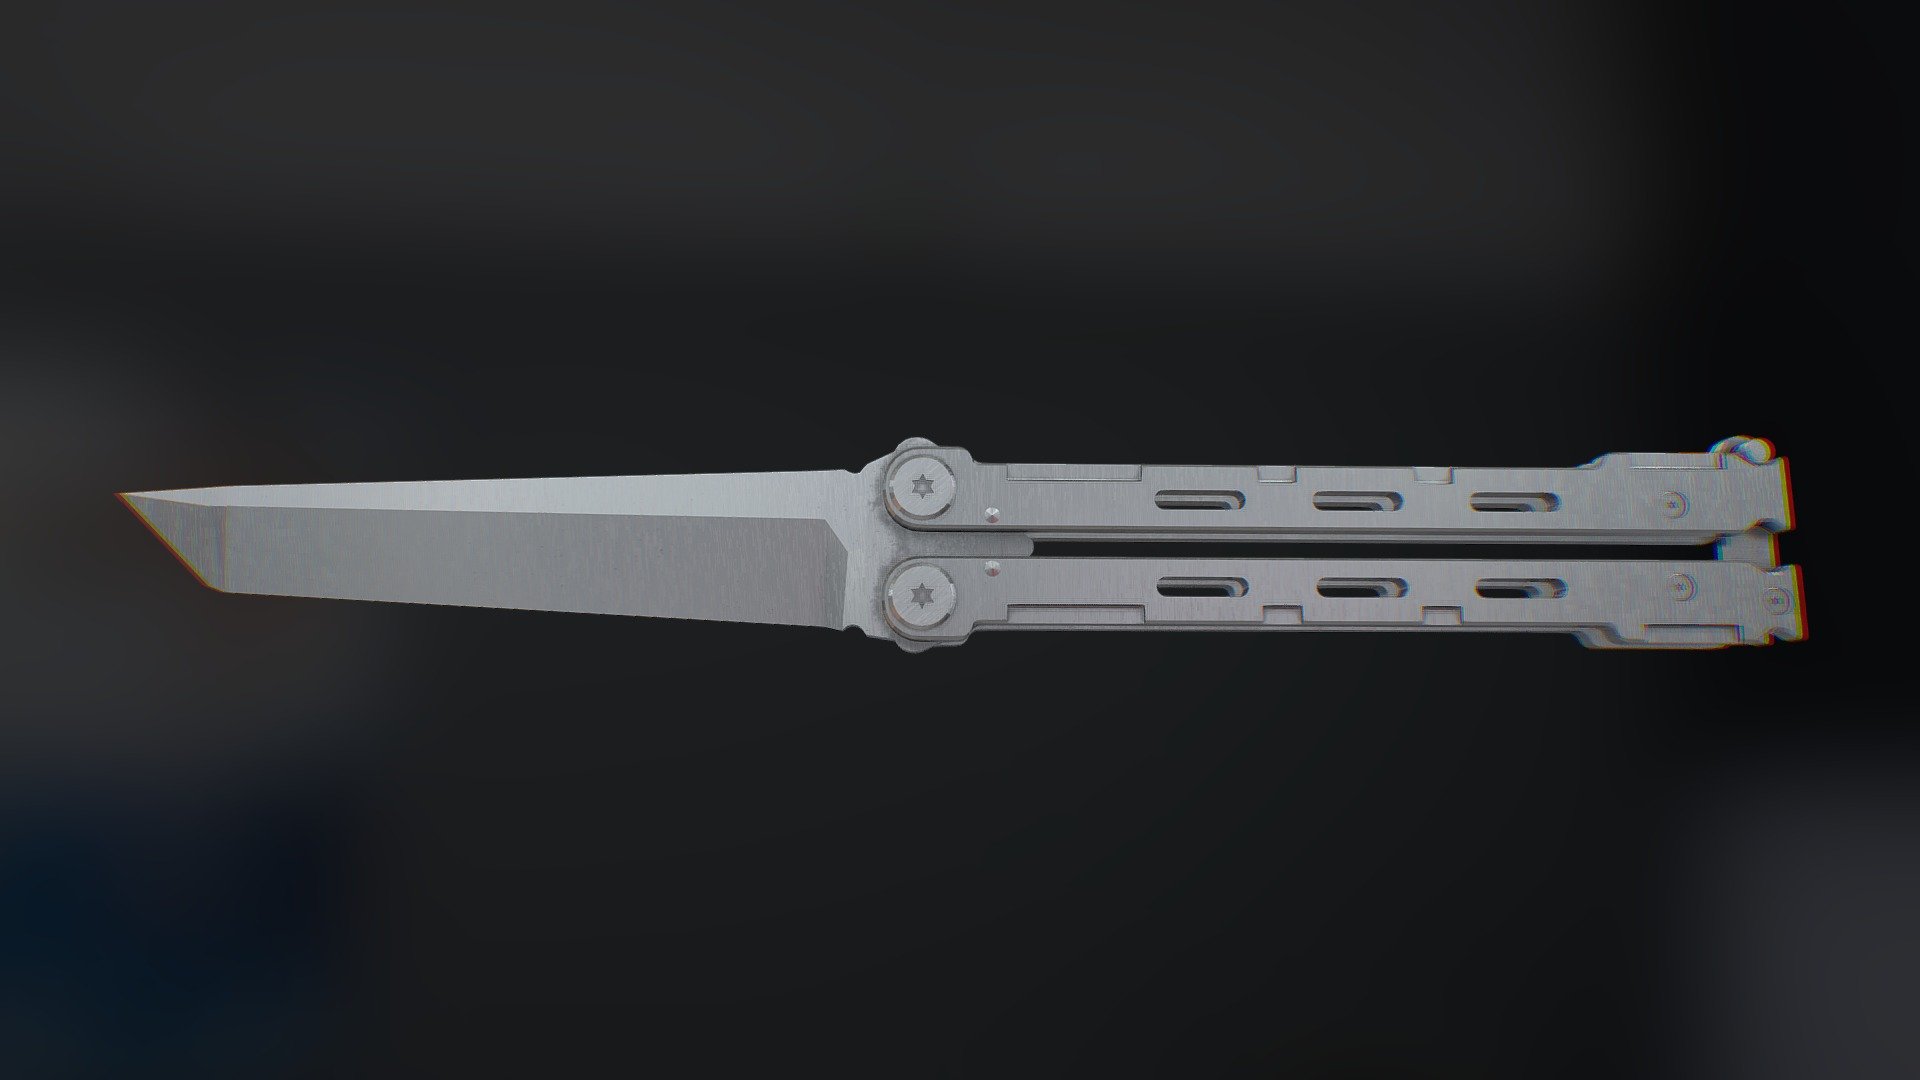 A Butterfly Knife. JINJUNLANG Brand. made 3D. This is a 3D replica of my knife.

3D MODEL




Has FBX file with embedded textures

Has OBJ and MTL files with textures folder

Textures resolution is 2k (2048x2048p)

INCLUDES BLENDER FILE

Blender file has all parts of the knife separated (Blade, folding grips, and the grip lock)

FBX and OBJ files have the knife parts welded together

Low poly

NOVICE MADE

BUY AT YOUR OWN LEISURE





I DO NOT OWN THE PHOTOS IN THE DESCRIPTION - Balisong - Buy Royalty Free 3D model by AnshiNoWara 3d model